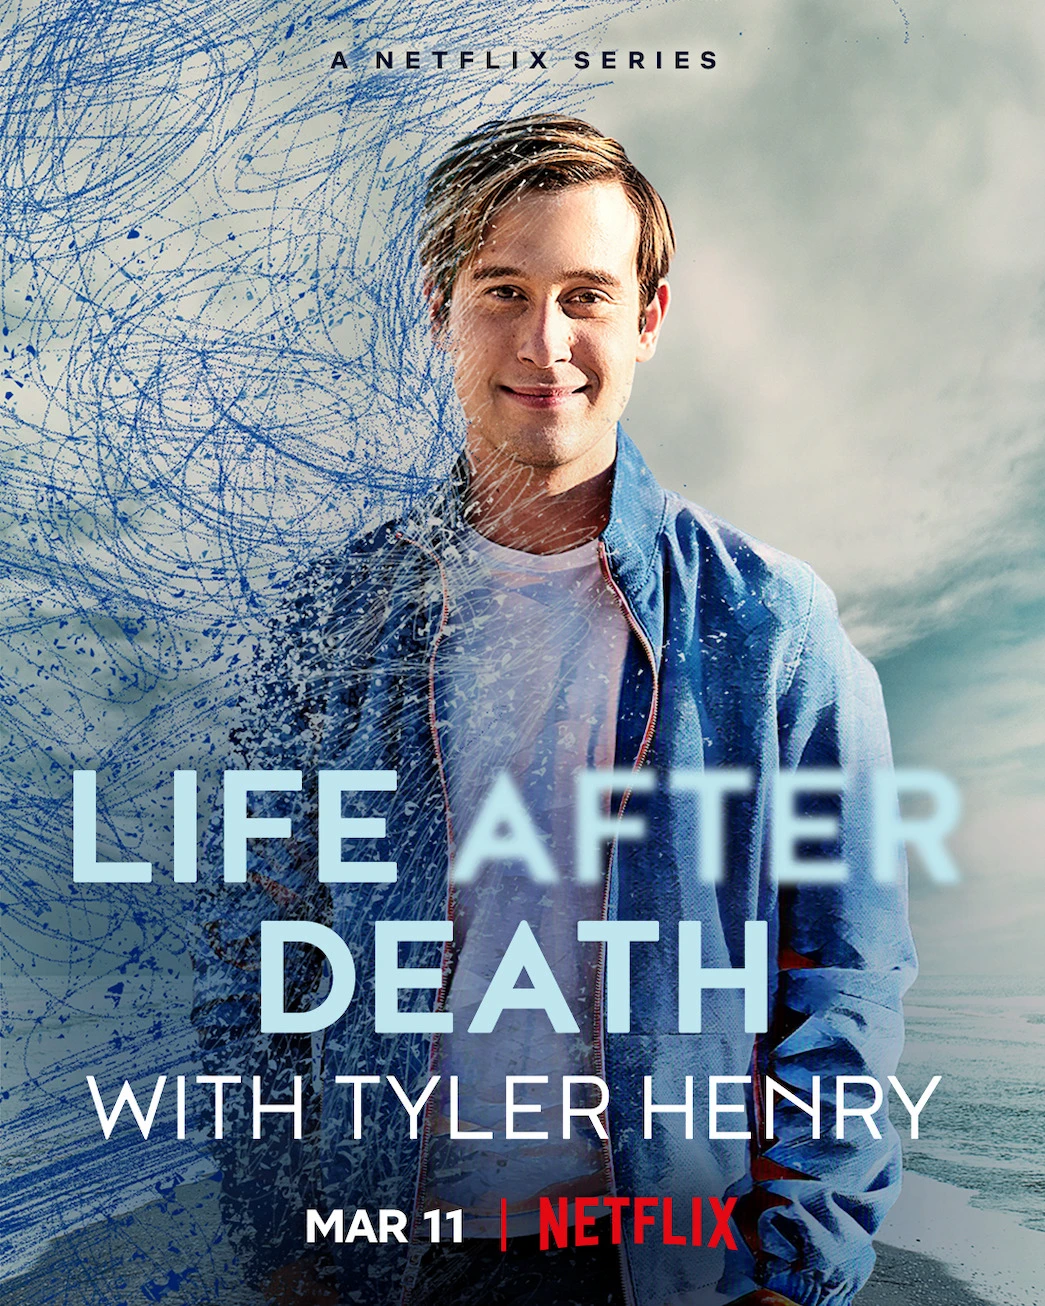 Tyler Henry: Cuộc sống sau khi chết | Life After Death with Tyler Henry (2022)